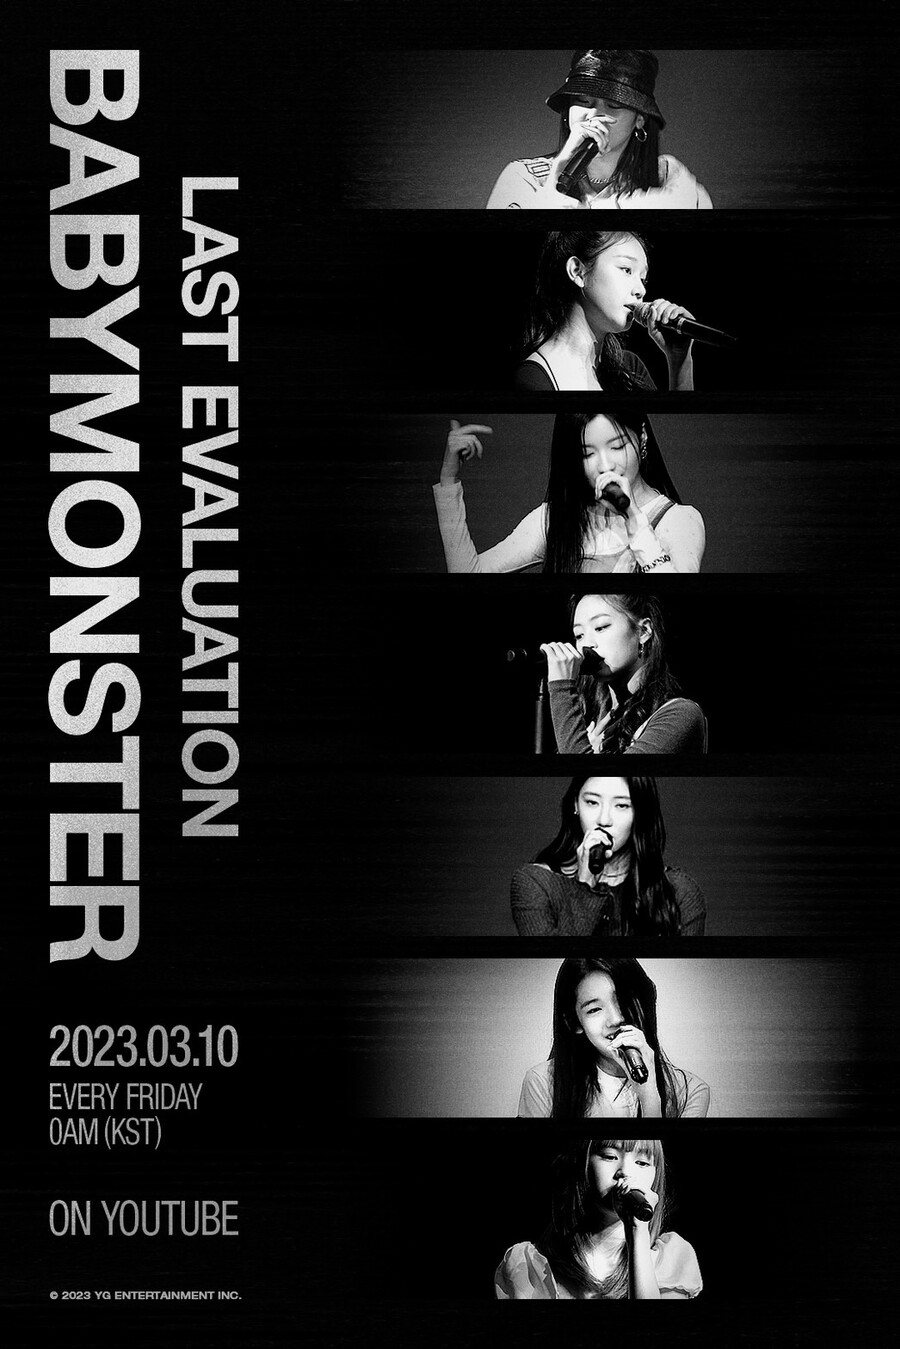 ▲ Baby Monster. Provided by YG Entertainment